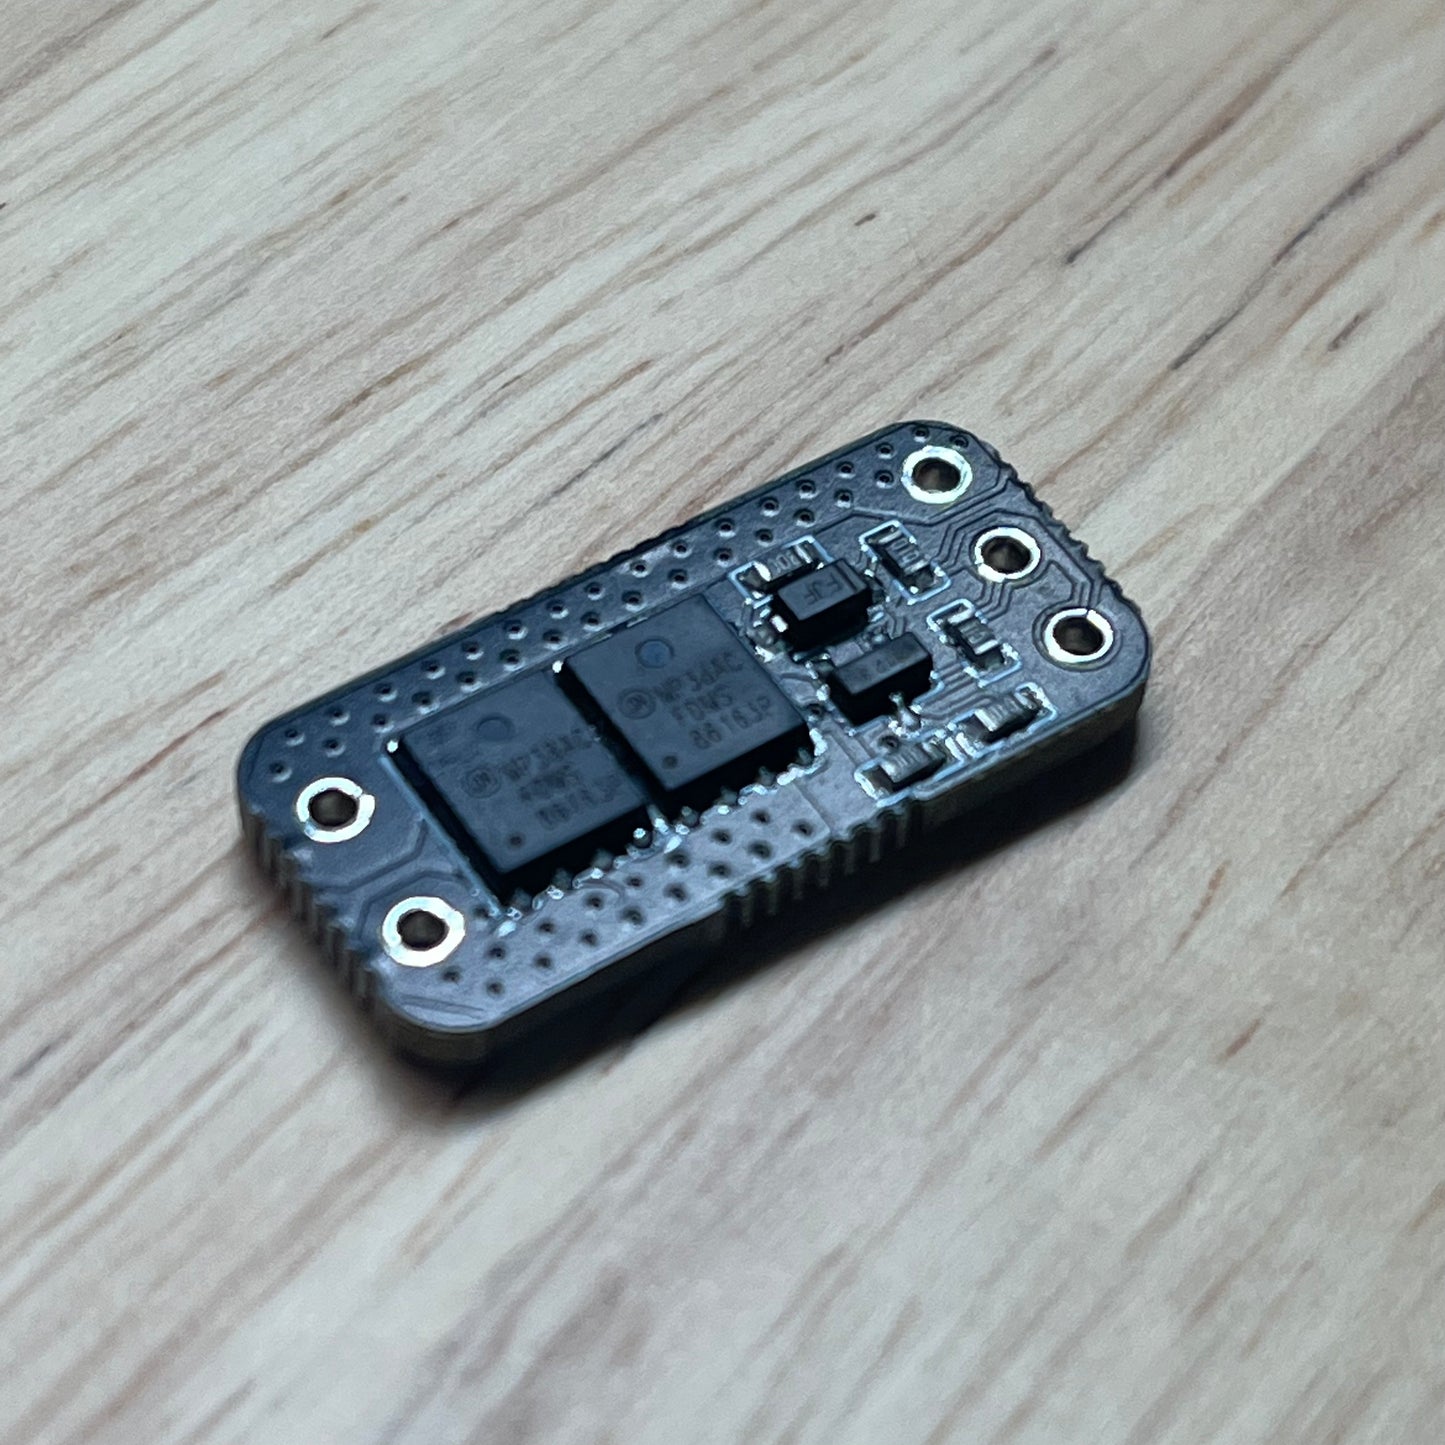 Charge Port Protector Board